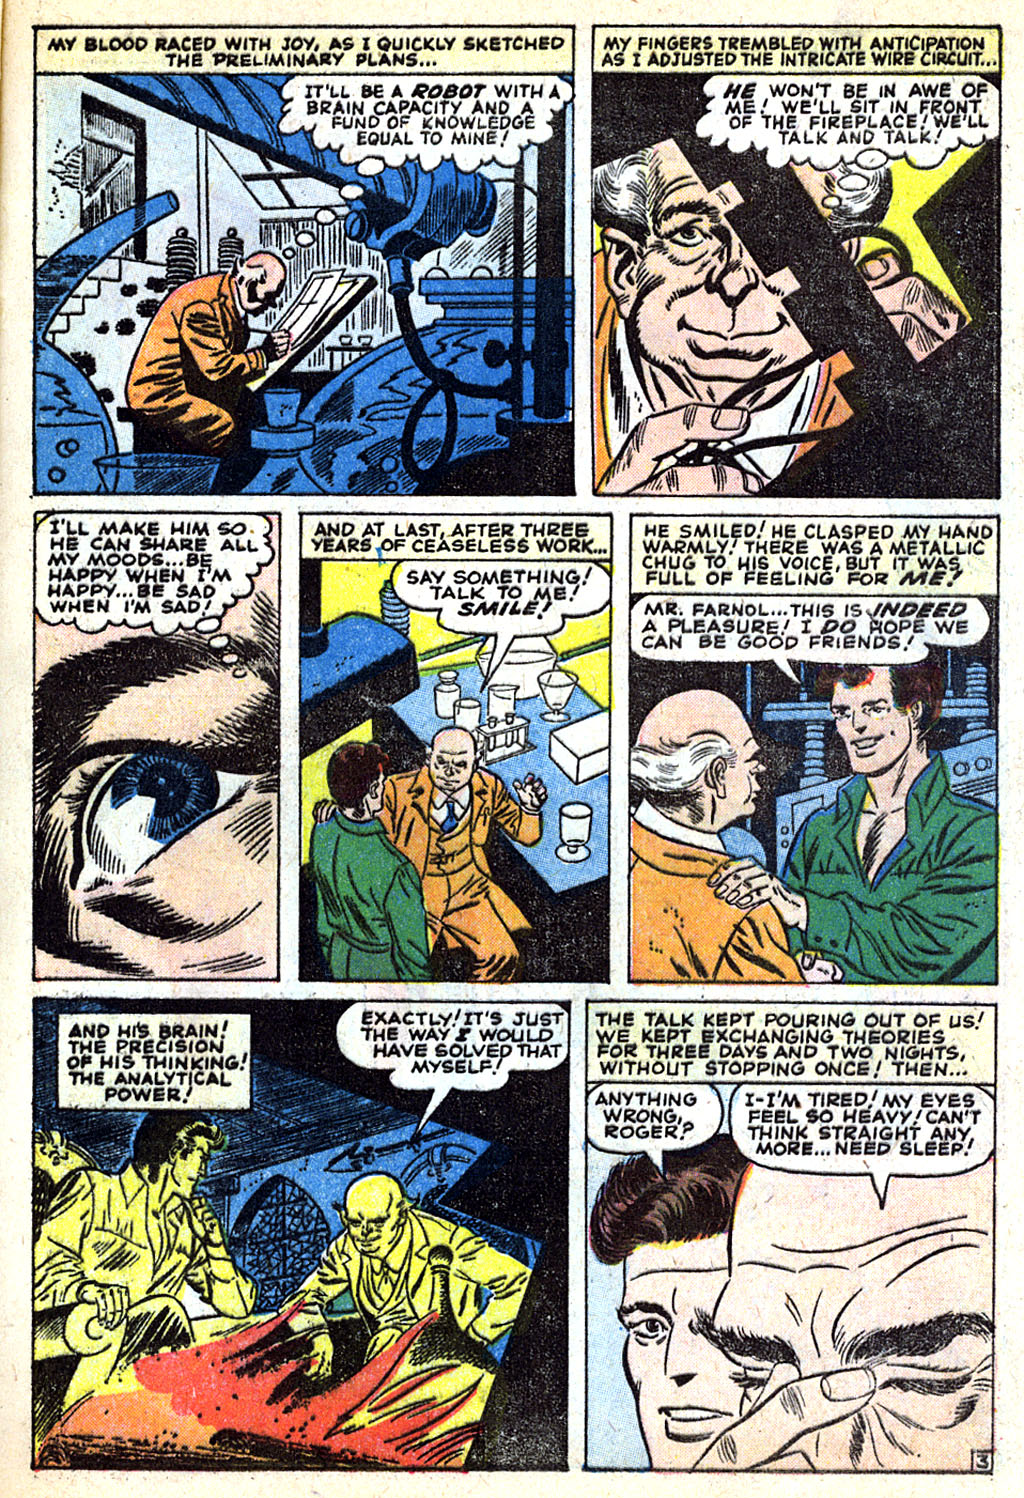 Marvel Tales (1949) 137 Page 4